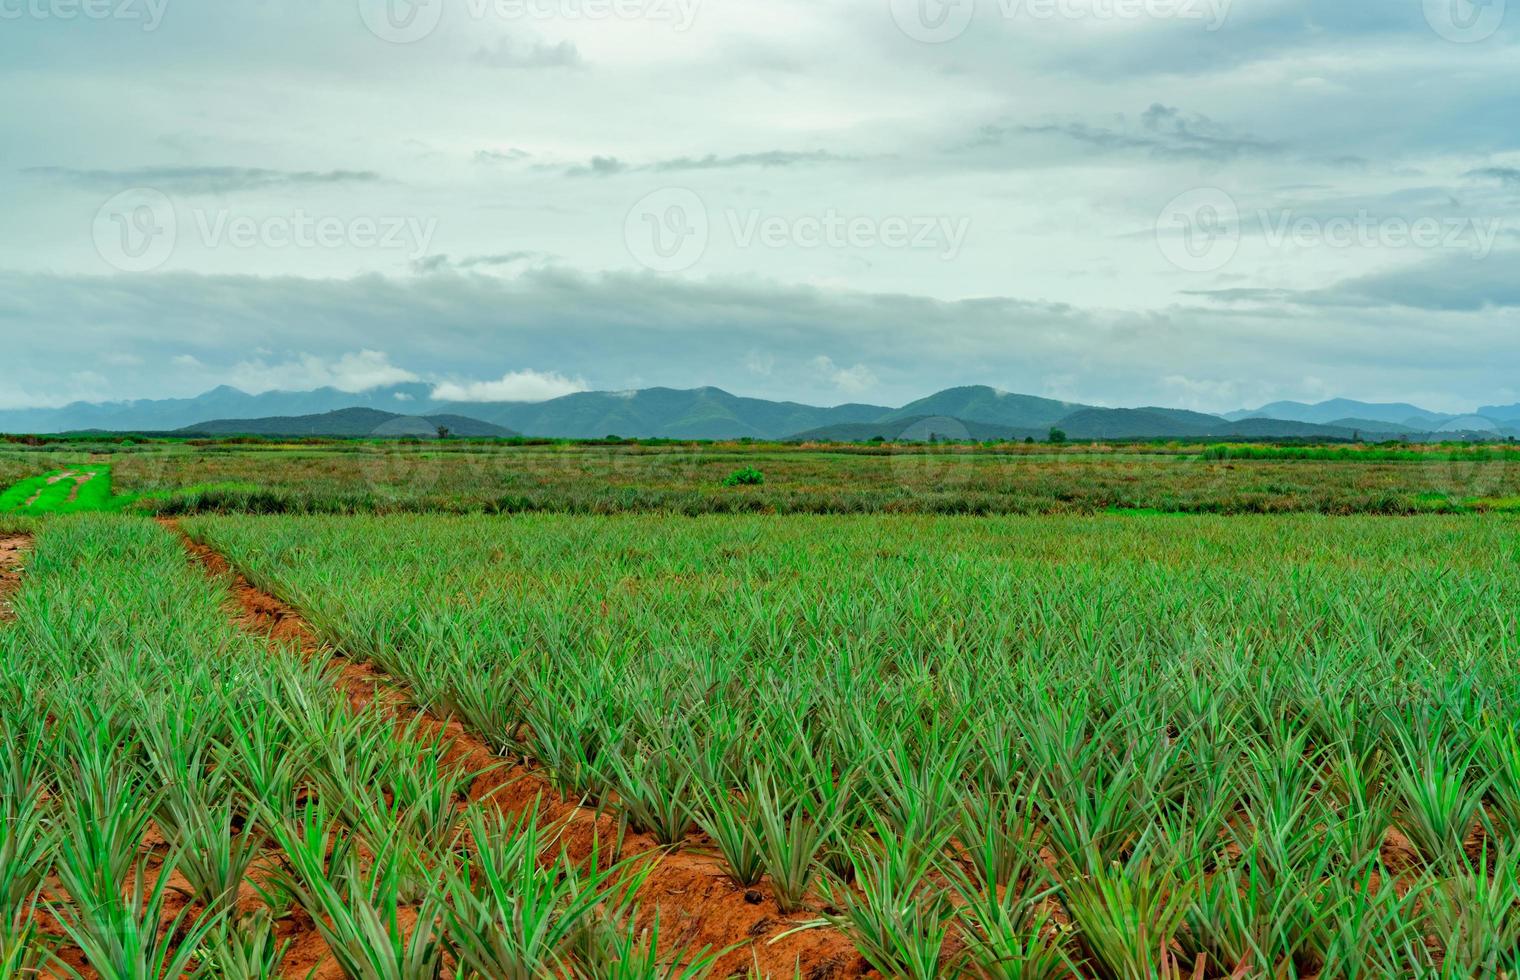 Pineapple plantation. Landscape pineapple farm and mountain. Plant cultivation. Growing pineapple in organic farm. Agriculture industry. Green pineapple tree in field and white sky and clouds. Farming photo